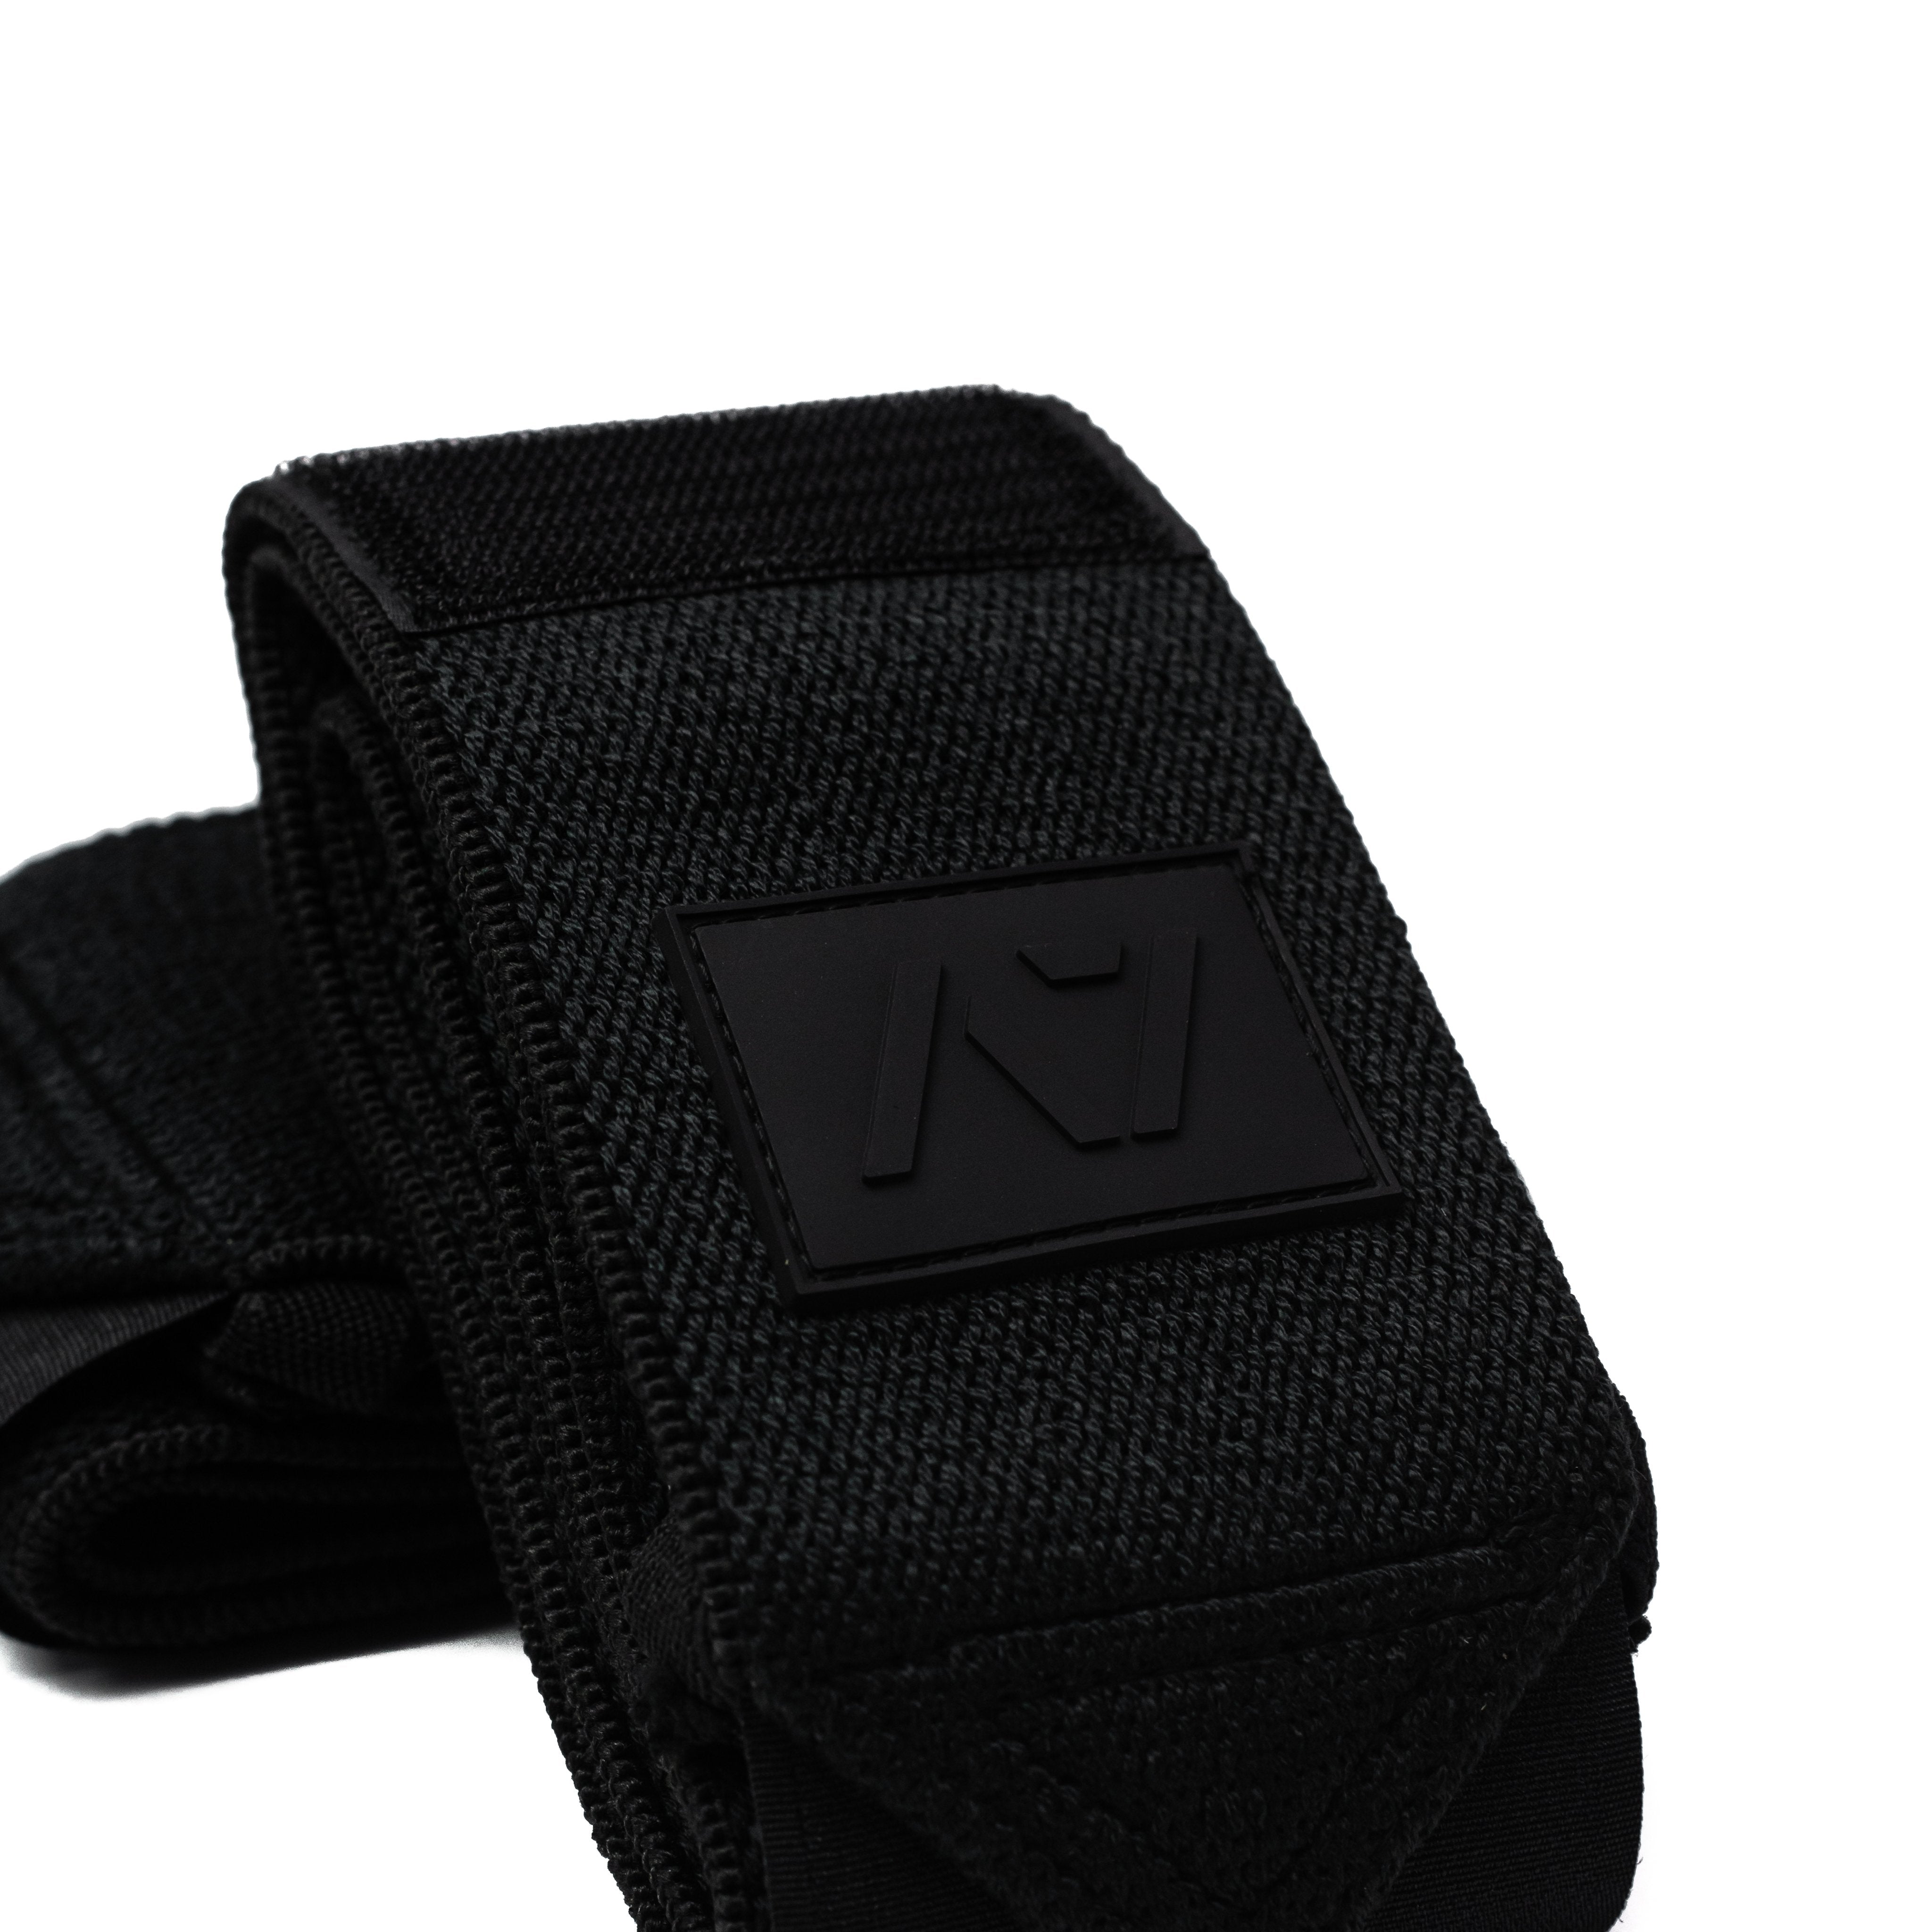 TThis Stealth colourway was created to mute out the logos and keep contrast at a minimum. A colourway that lets your performance and dedication remain the focus while still providing the level of quality, support and comfort you demand from your products. These wrist wraps are a perfect addition to your IPF approved kit.